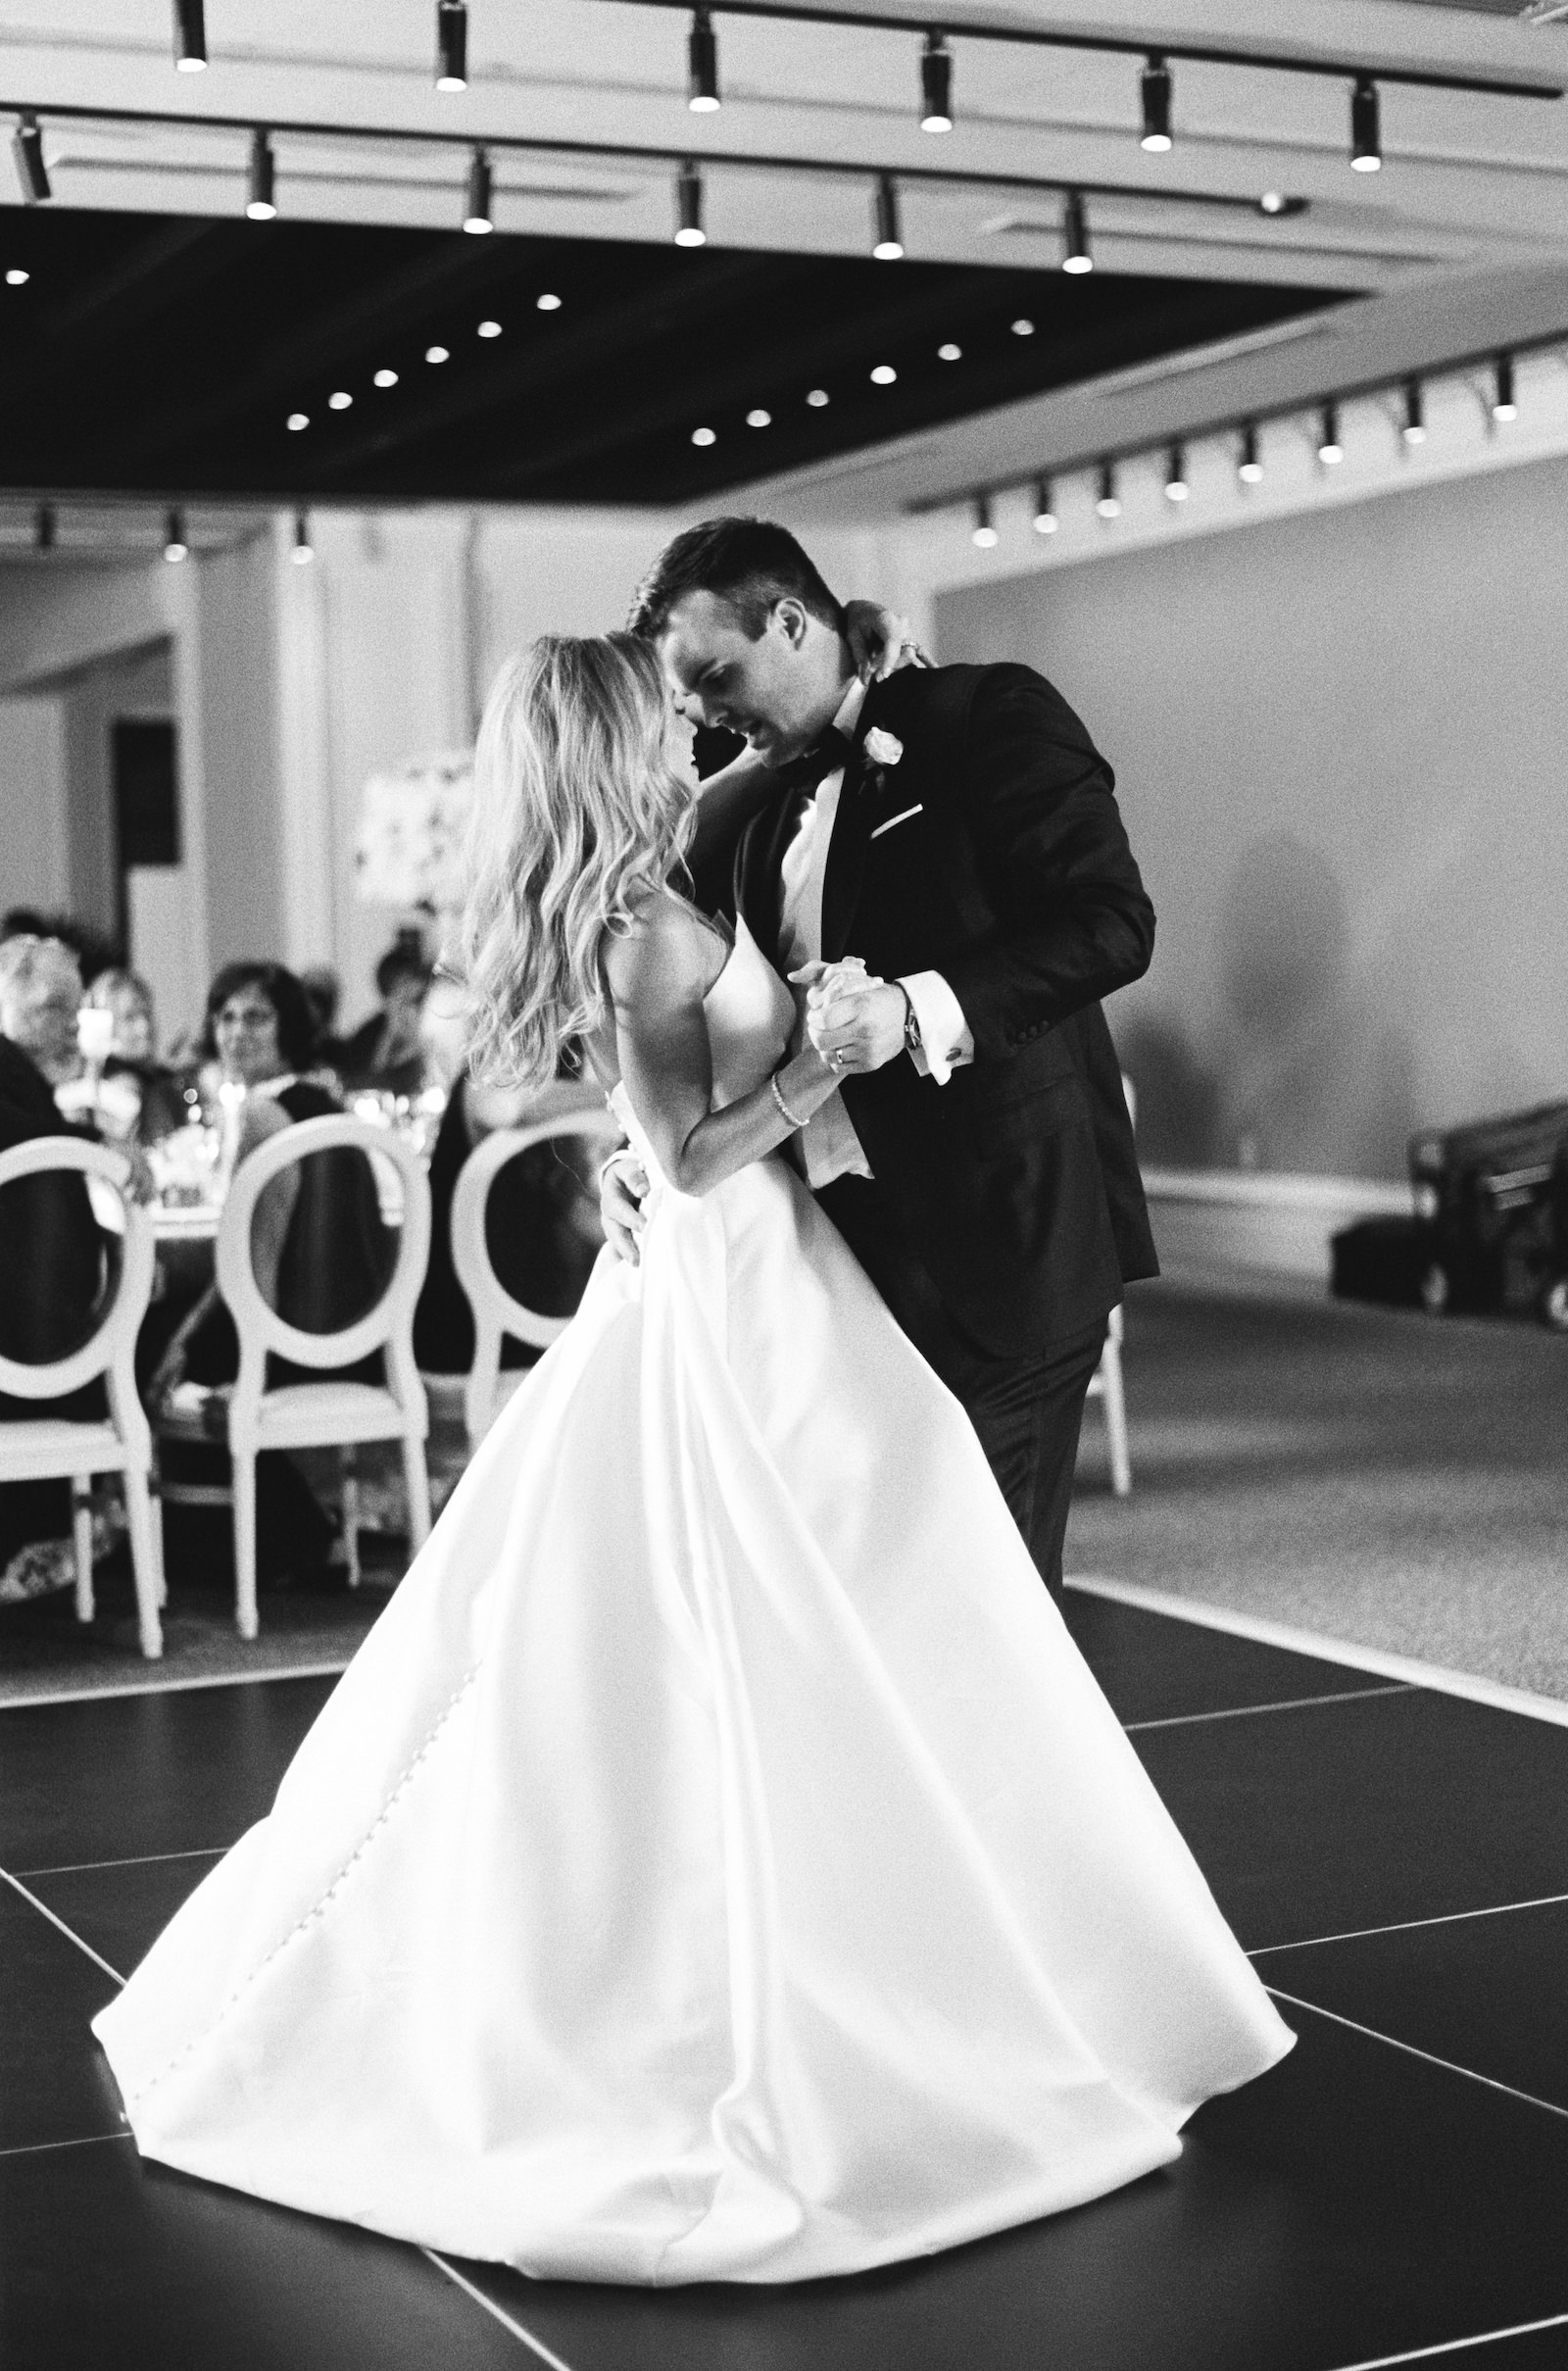 Luxurious Formal Black and White Portrait, Bride and Groom First Dance